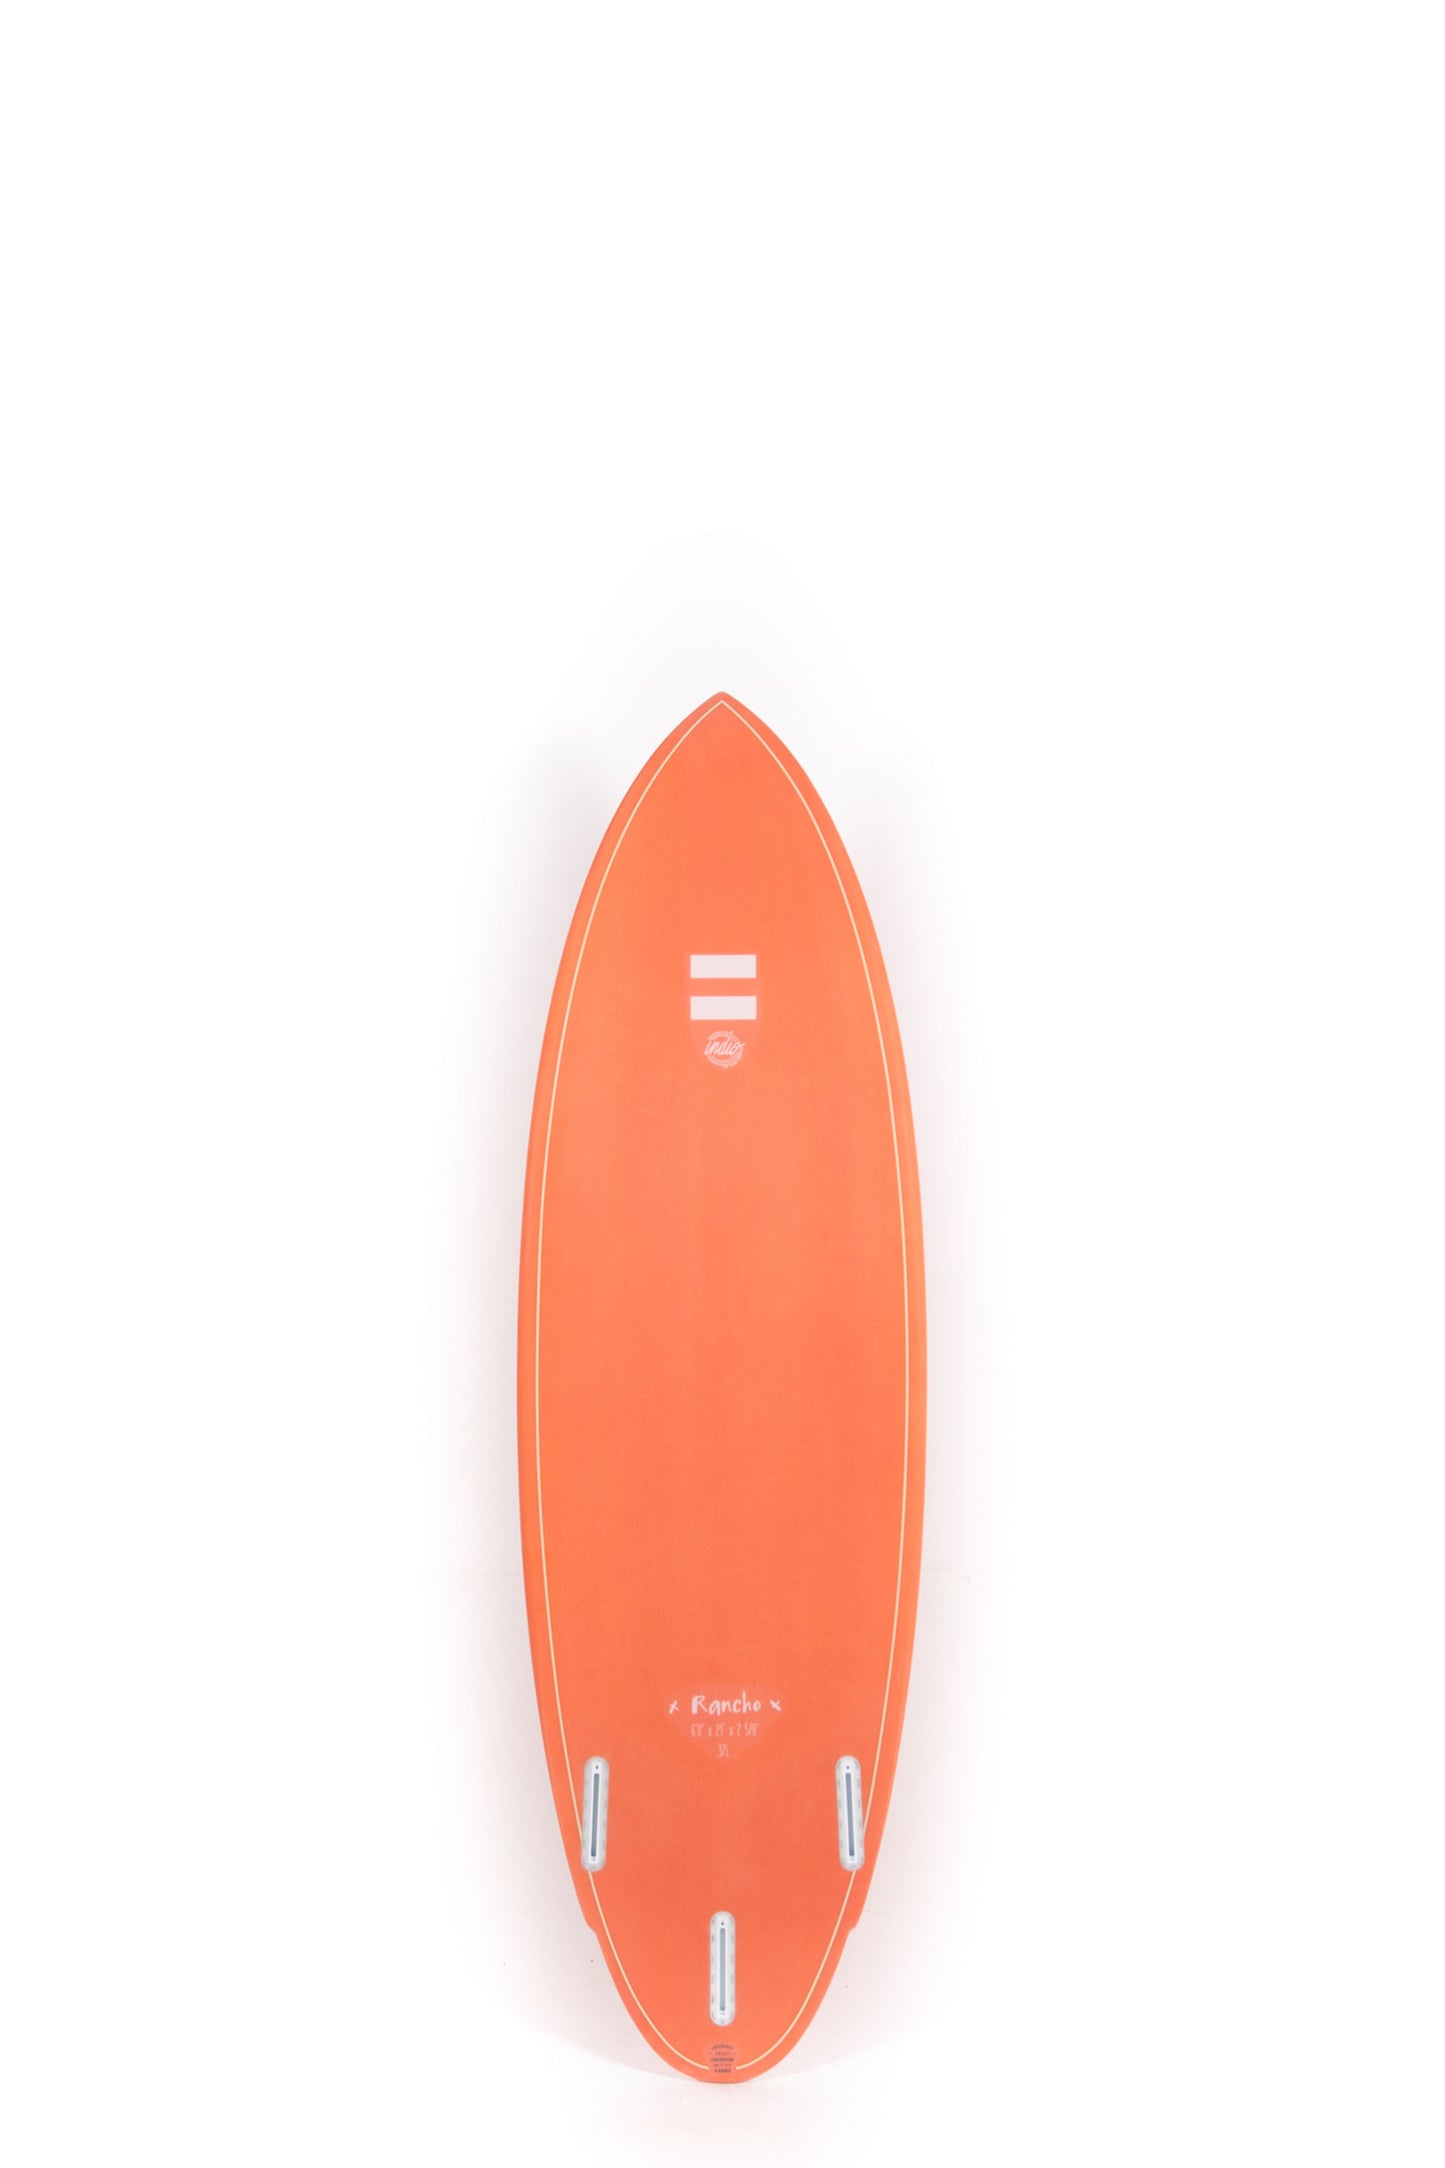 Pukas Surf Shop Indio Surfboards Rancho Red Fall 6'0"